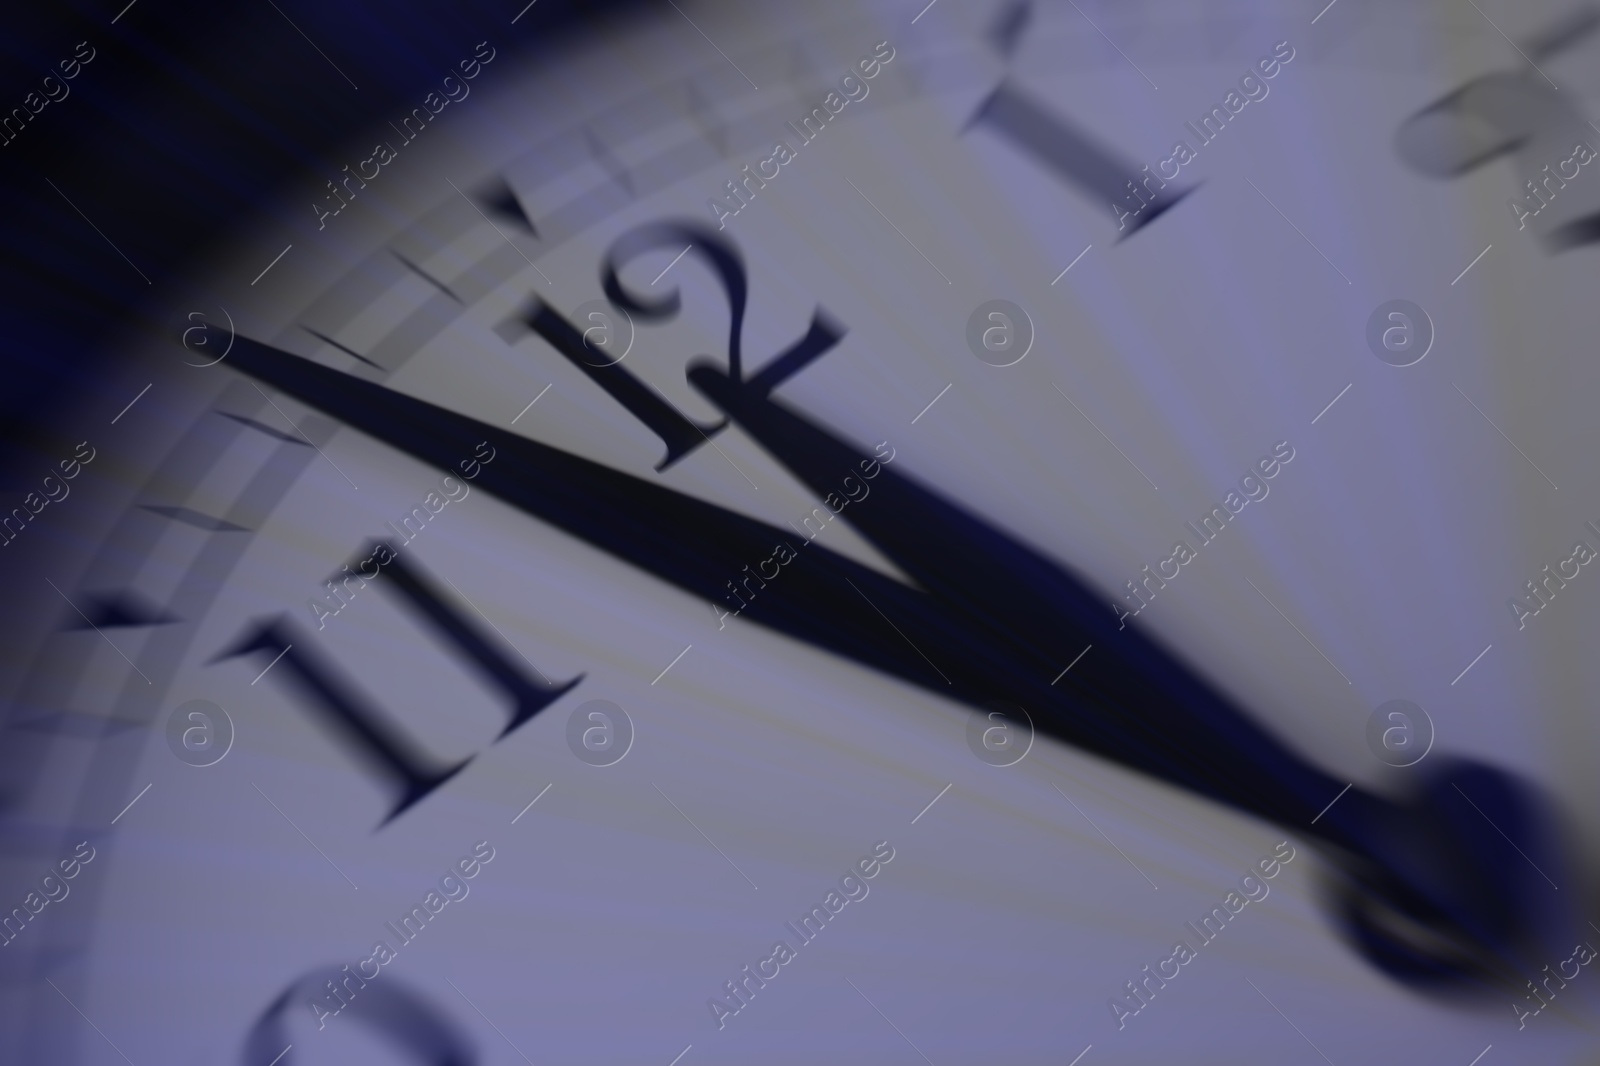 Image of Closeup view of clock, motion blur effect. Time concept